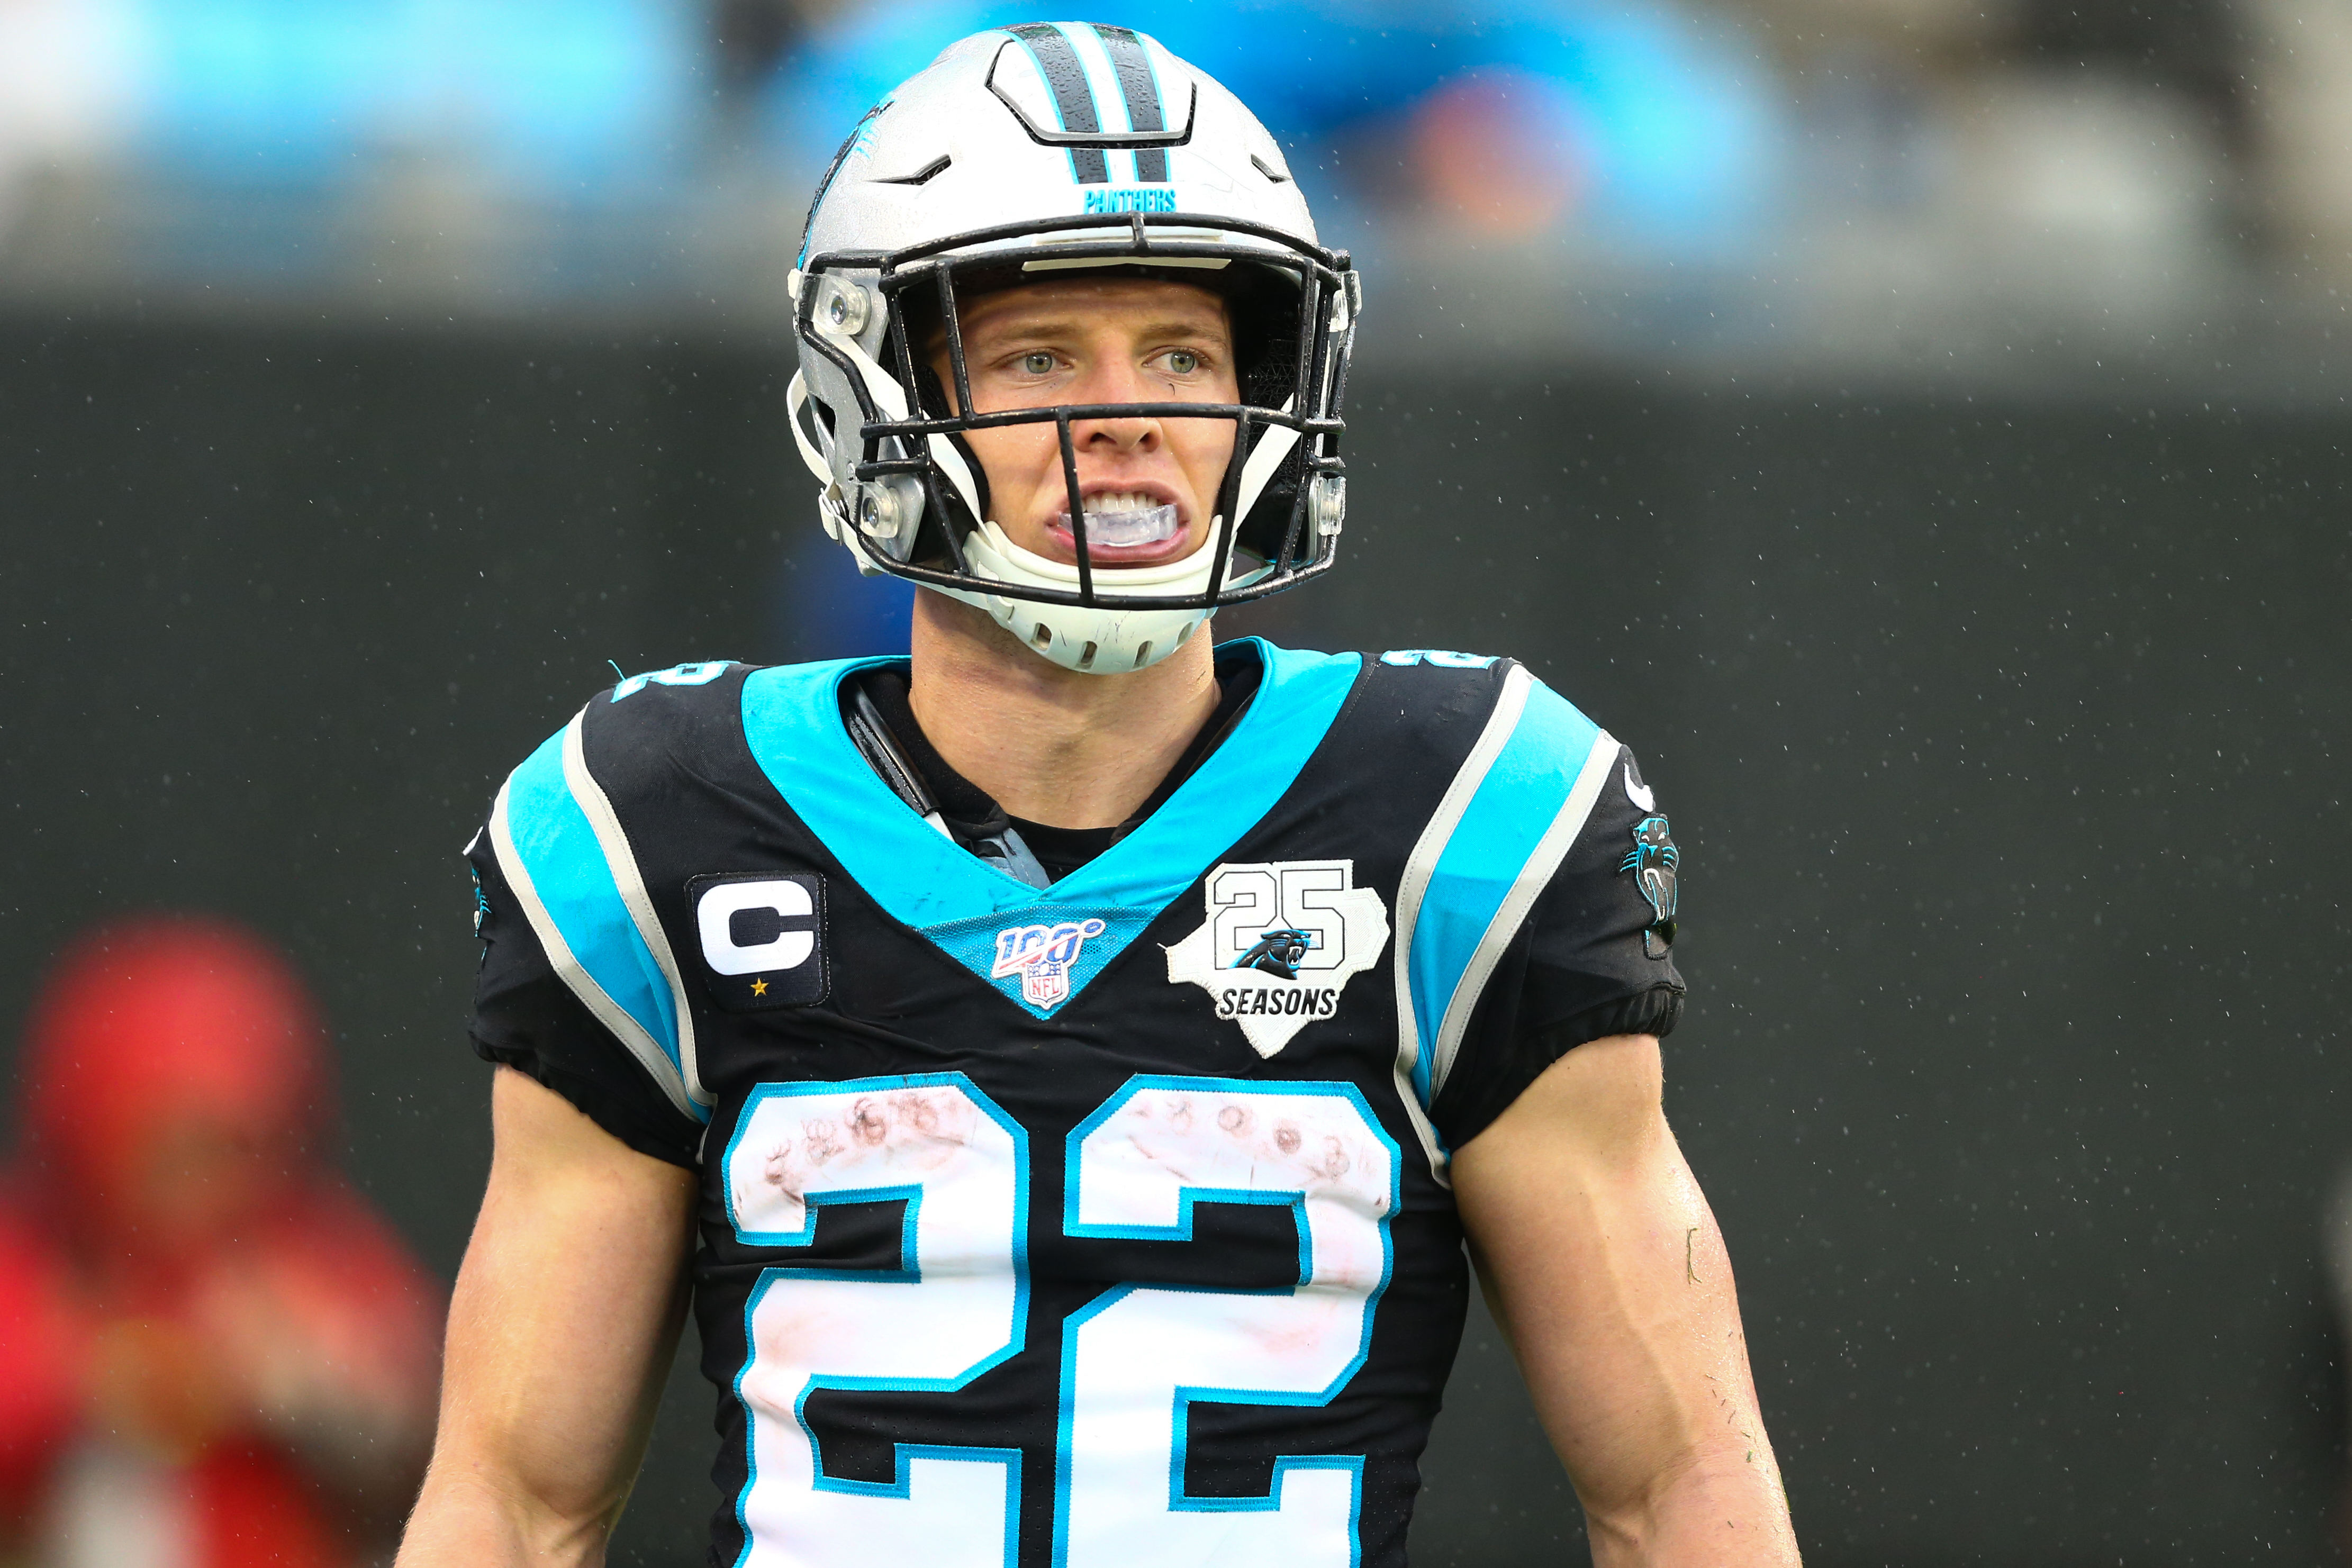 Carolina Panthers running back Christian McCaffrey (22) looks on from the field during the third quarter against the New Orleans Saints at Bank of America Stadium.